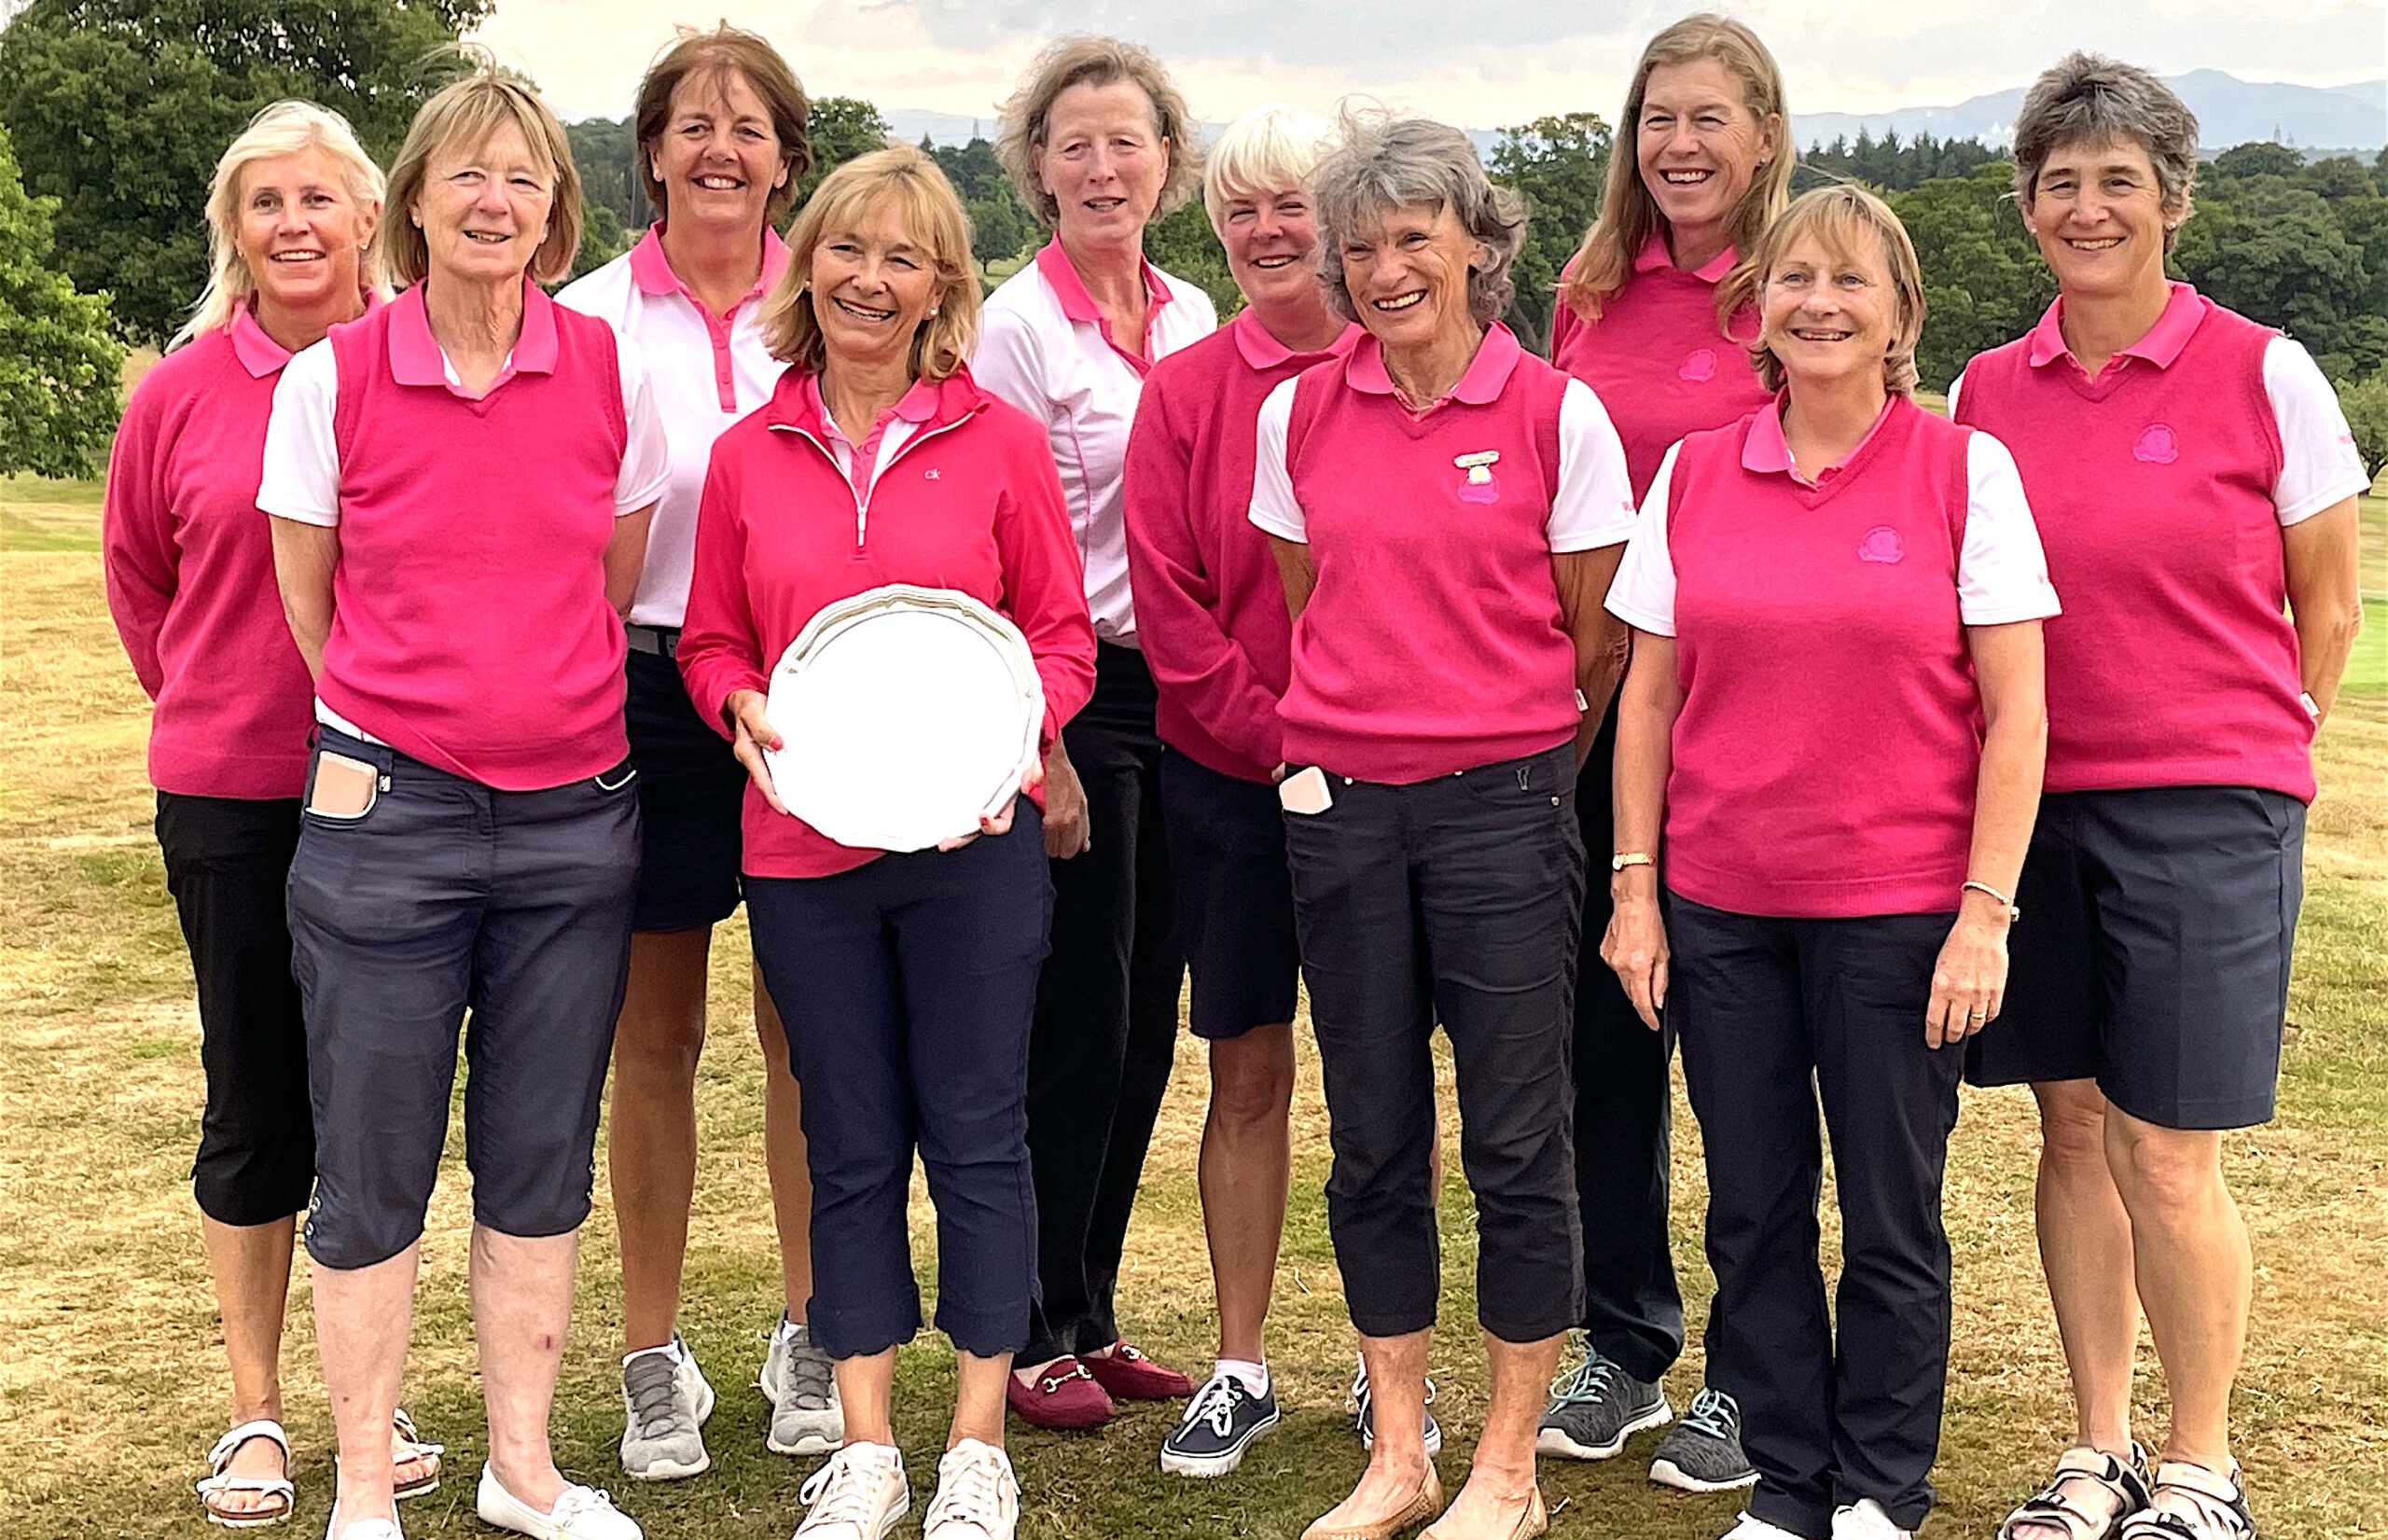 CHAMPIONS: The victorious South region team with captain Debbie Richards holding the trophy